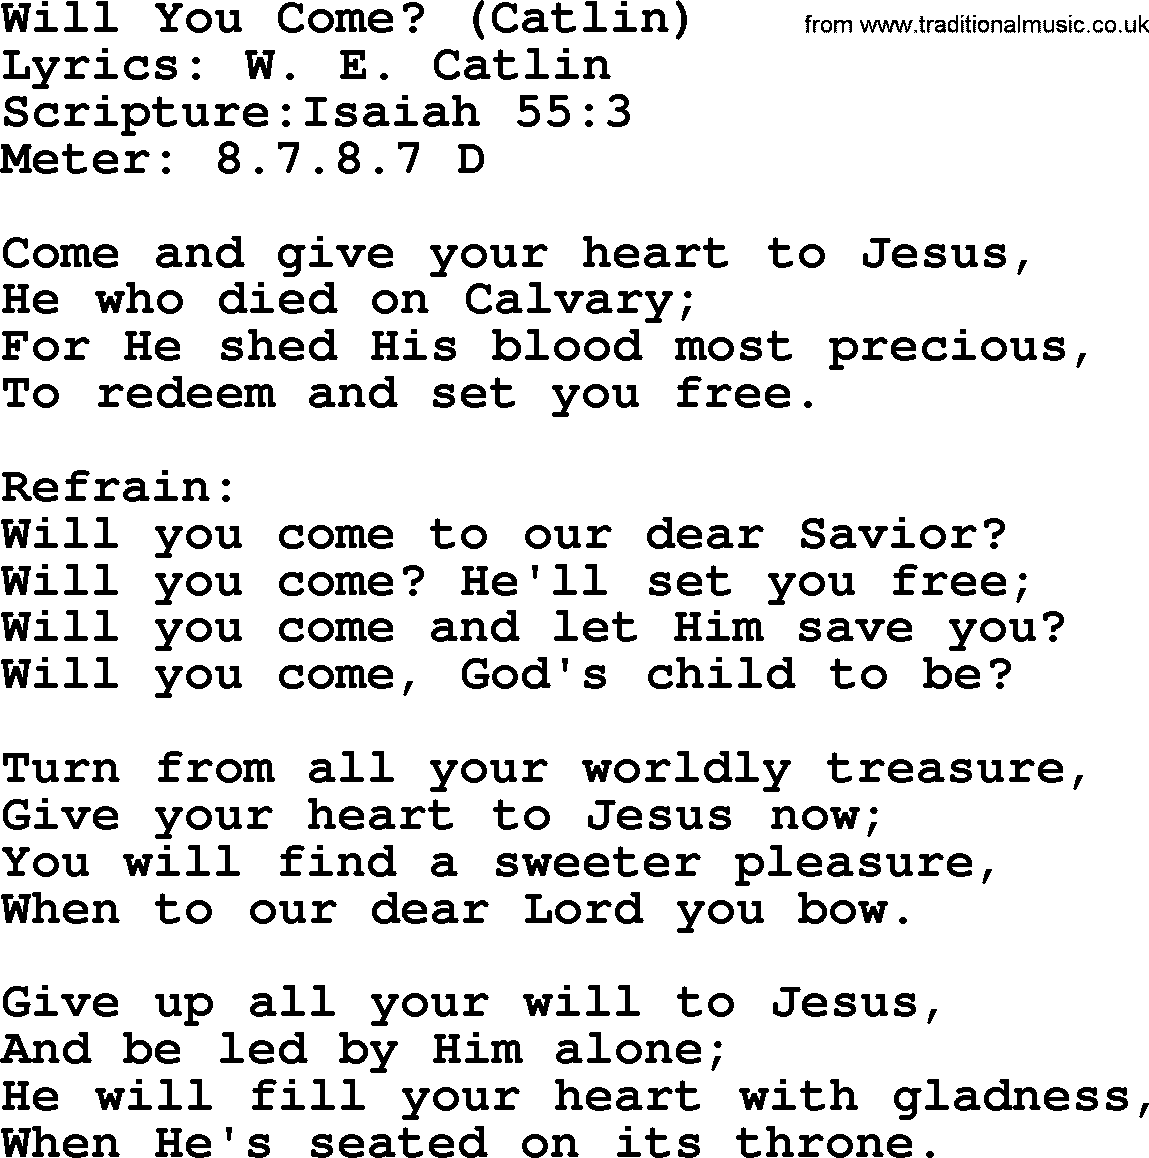 Hymns about  Angels, Hymn: Will You Come_ (Catlin), lyrics, sheet music, midi & Mp3 music with PDF